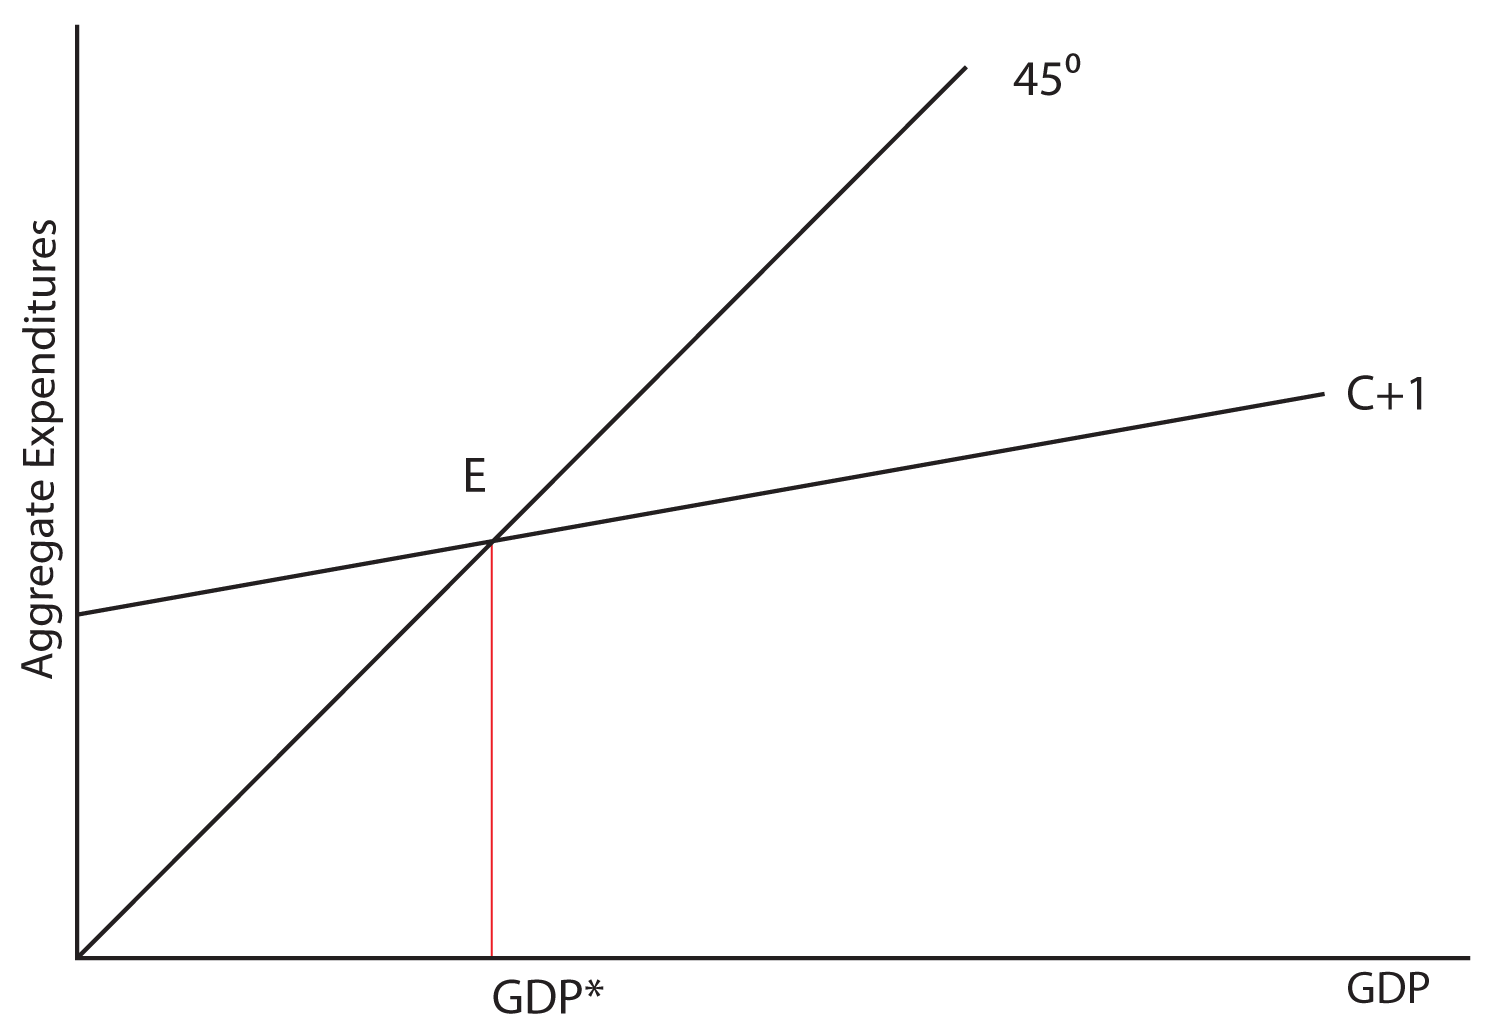 Image 7.01: The picture shows a graph of the Aggregate Expenditures Model. The y axis is labeled Aggregate Expenditures, and the x axis is labeled GDP. A 45 degree line is drawn from the origin. A line with the slope of C + 1 originates higher on the y axis and intersects the 45 degree line at point E. A vertical line is drawn from point E to the x axis to show the value of the GDP.